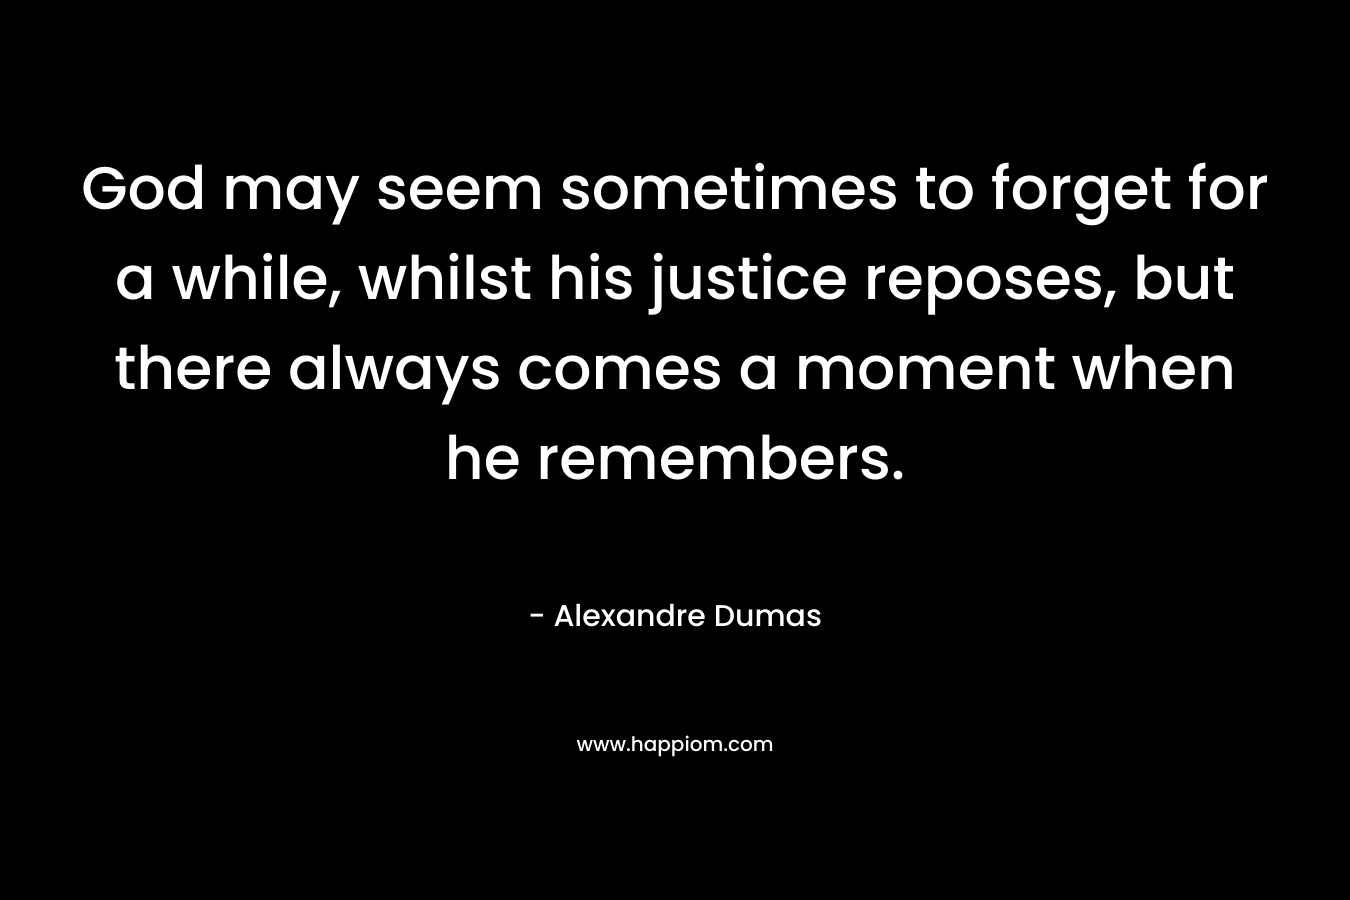 God may seem sometimes to forget for a while, whilst his justice reposes, but there always comes a moment when he remembers. – Alexandre Dumas